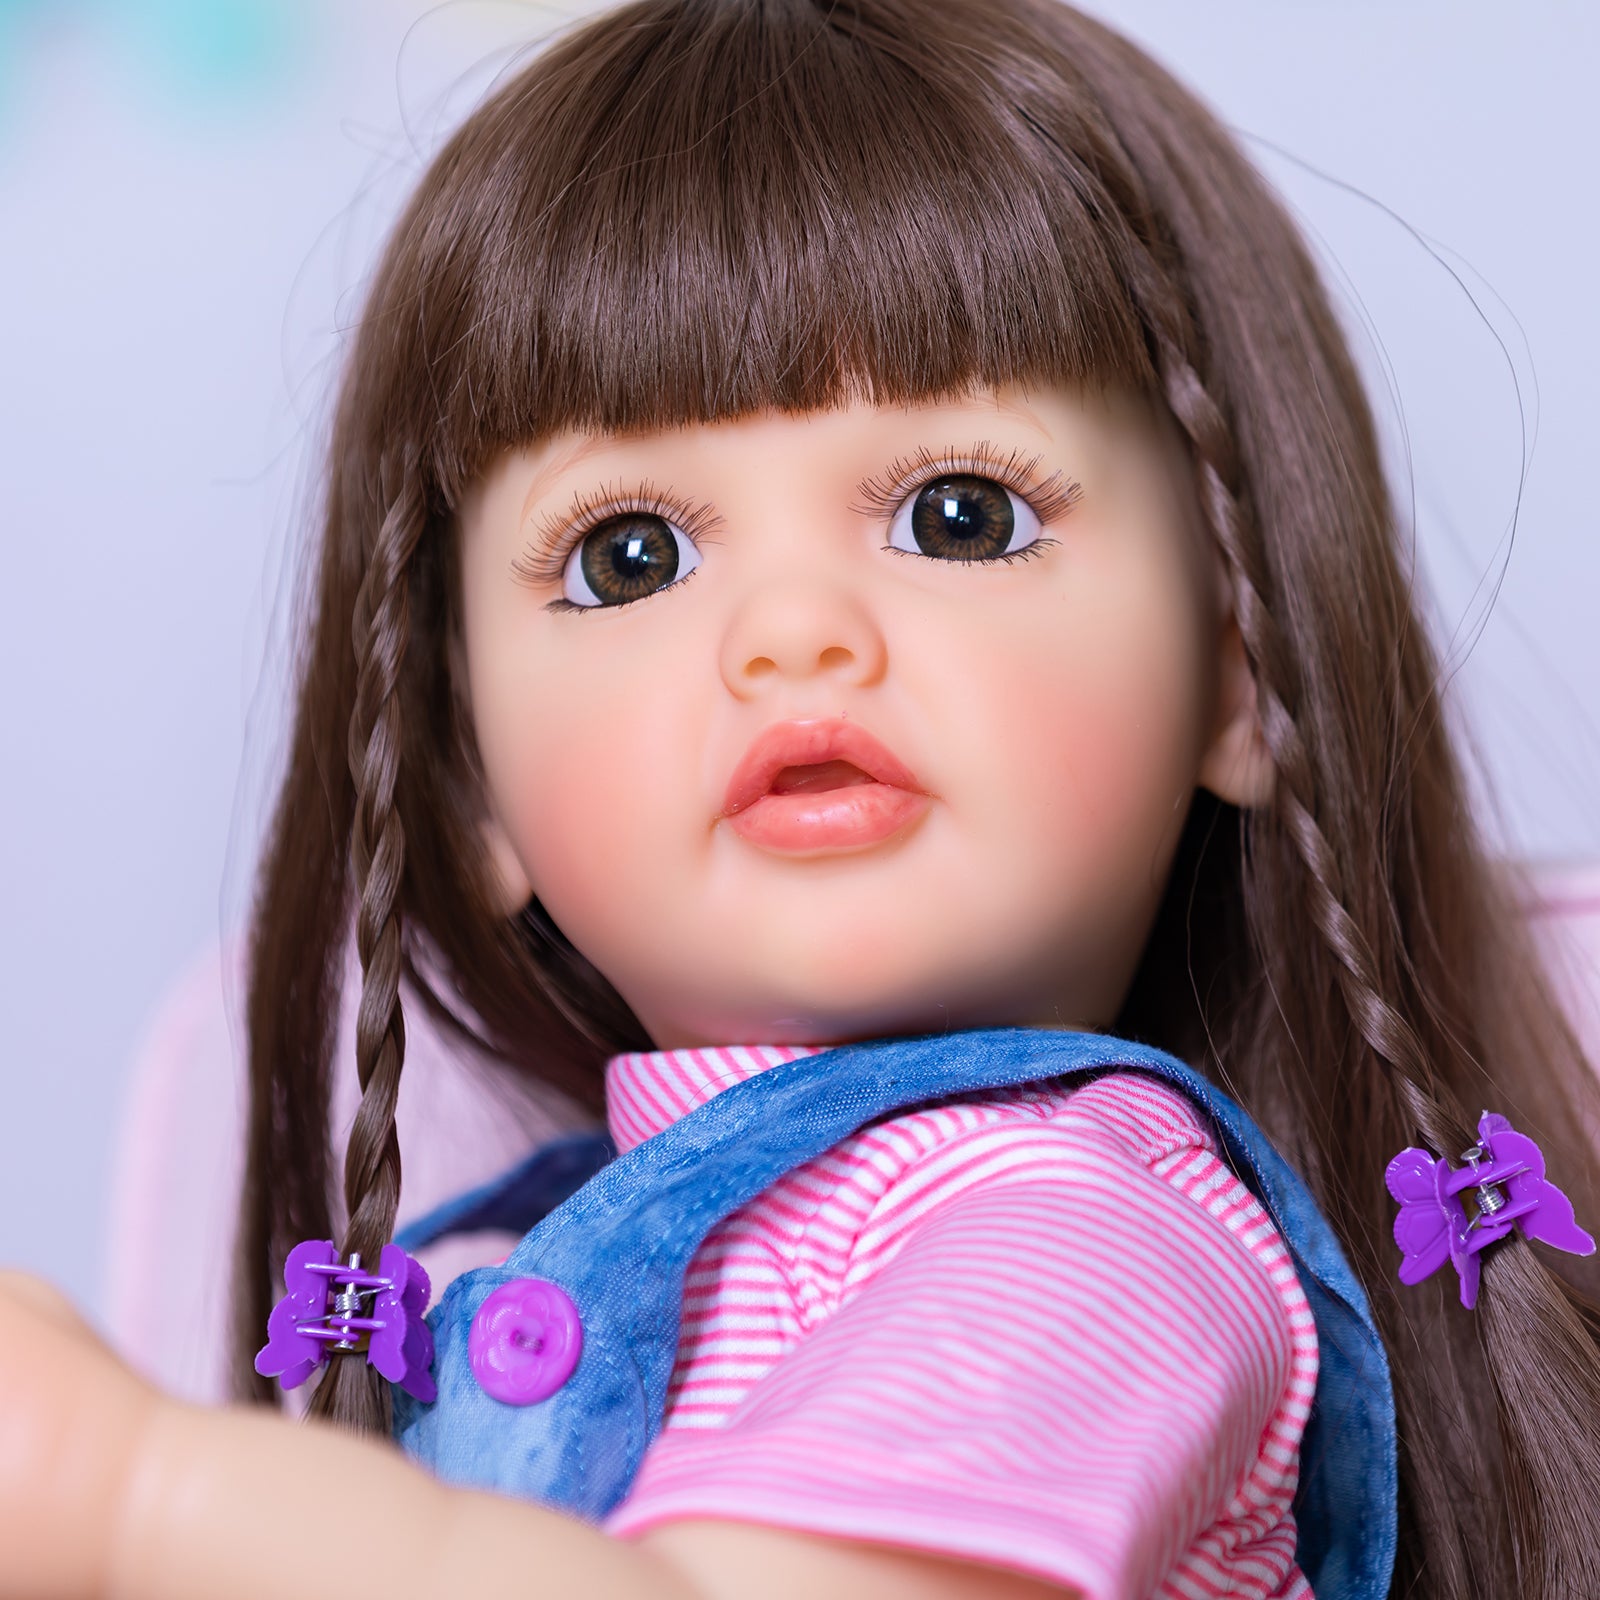 Adorable Long Hair Girls Lifelike Reborn Baby Dolls Silicone Full Body Realistic Baby Dolls Toddler Girl 55CM 22 Inch Real Newborn Babies Size That Look Real Baby Doll Toys Gifts For 3+ Year Old Girls